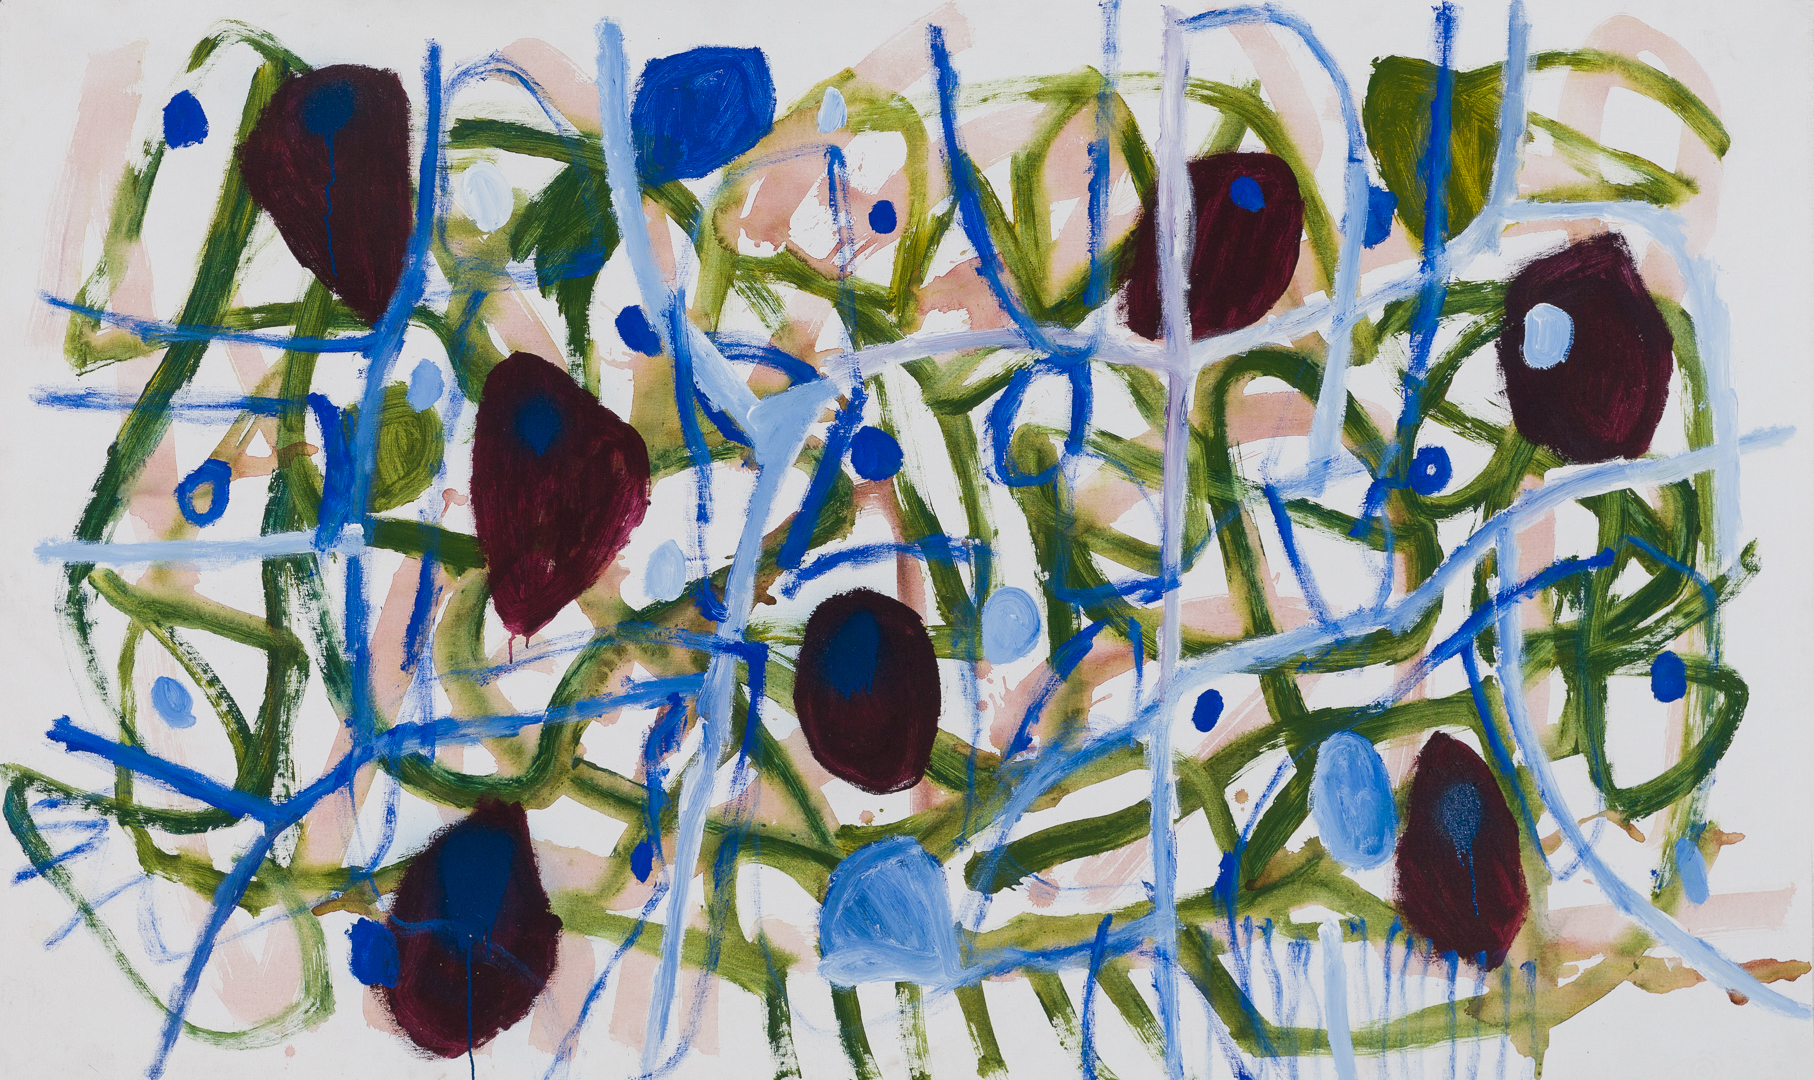 Poulet-Untitled (Rock Weed)_acrylic on canvas_120 x 200cm